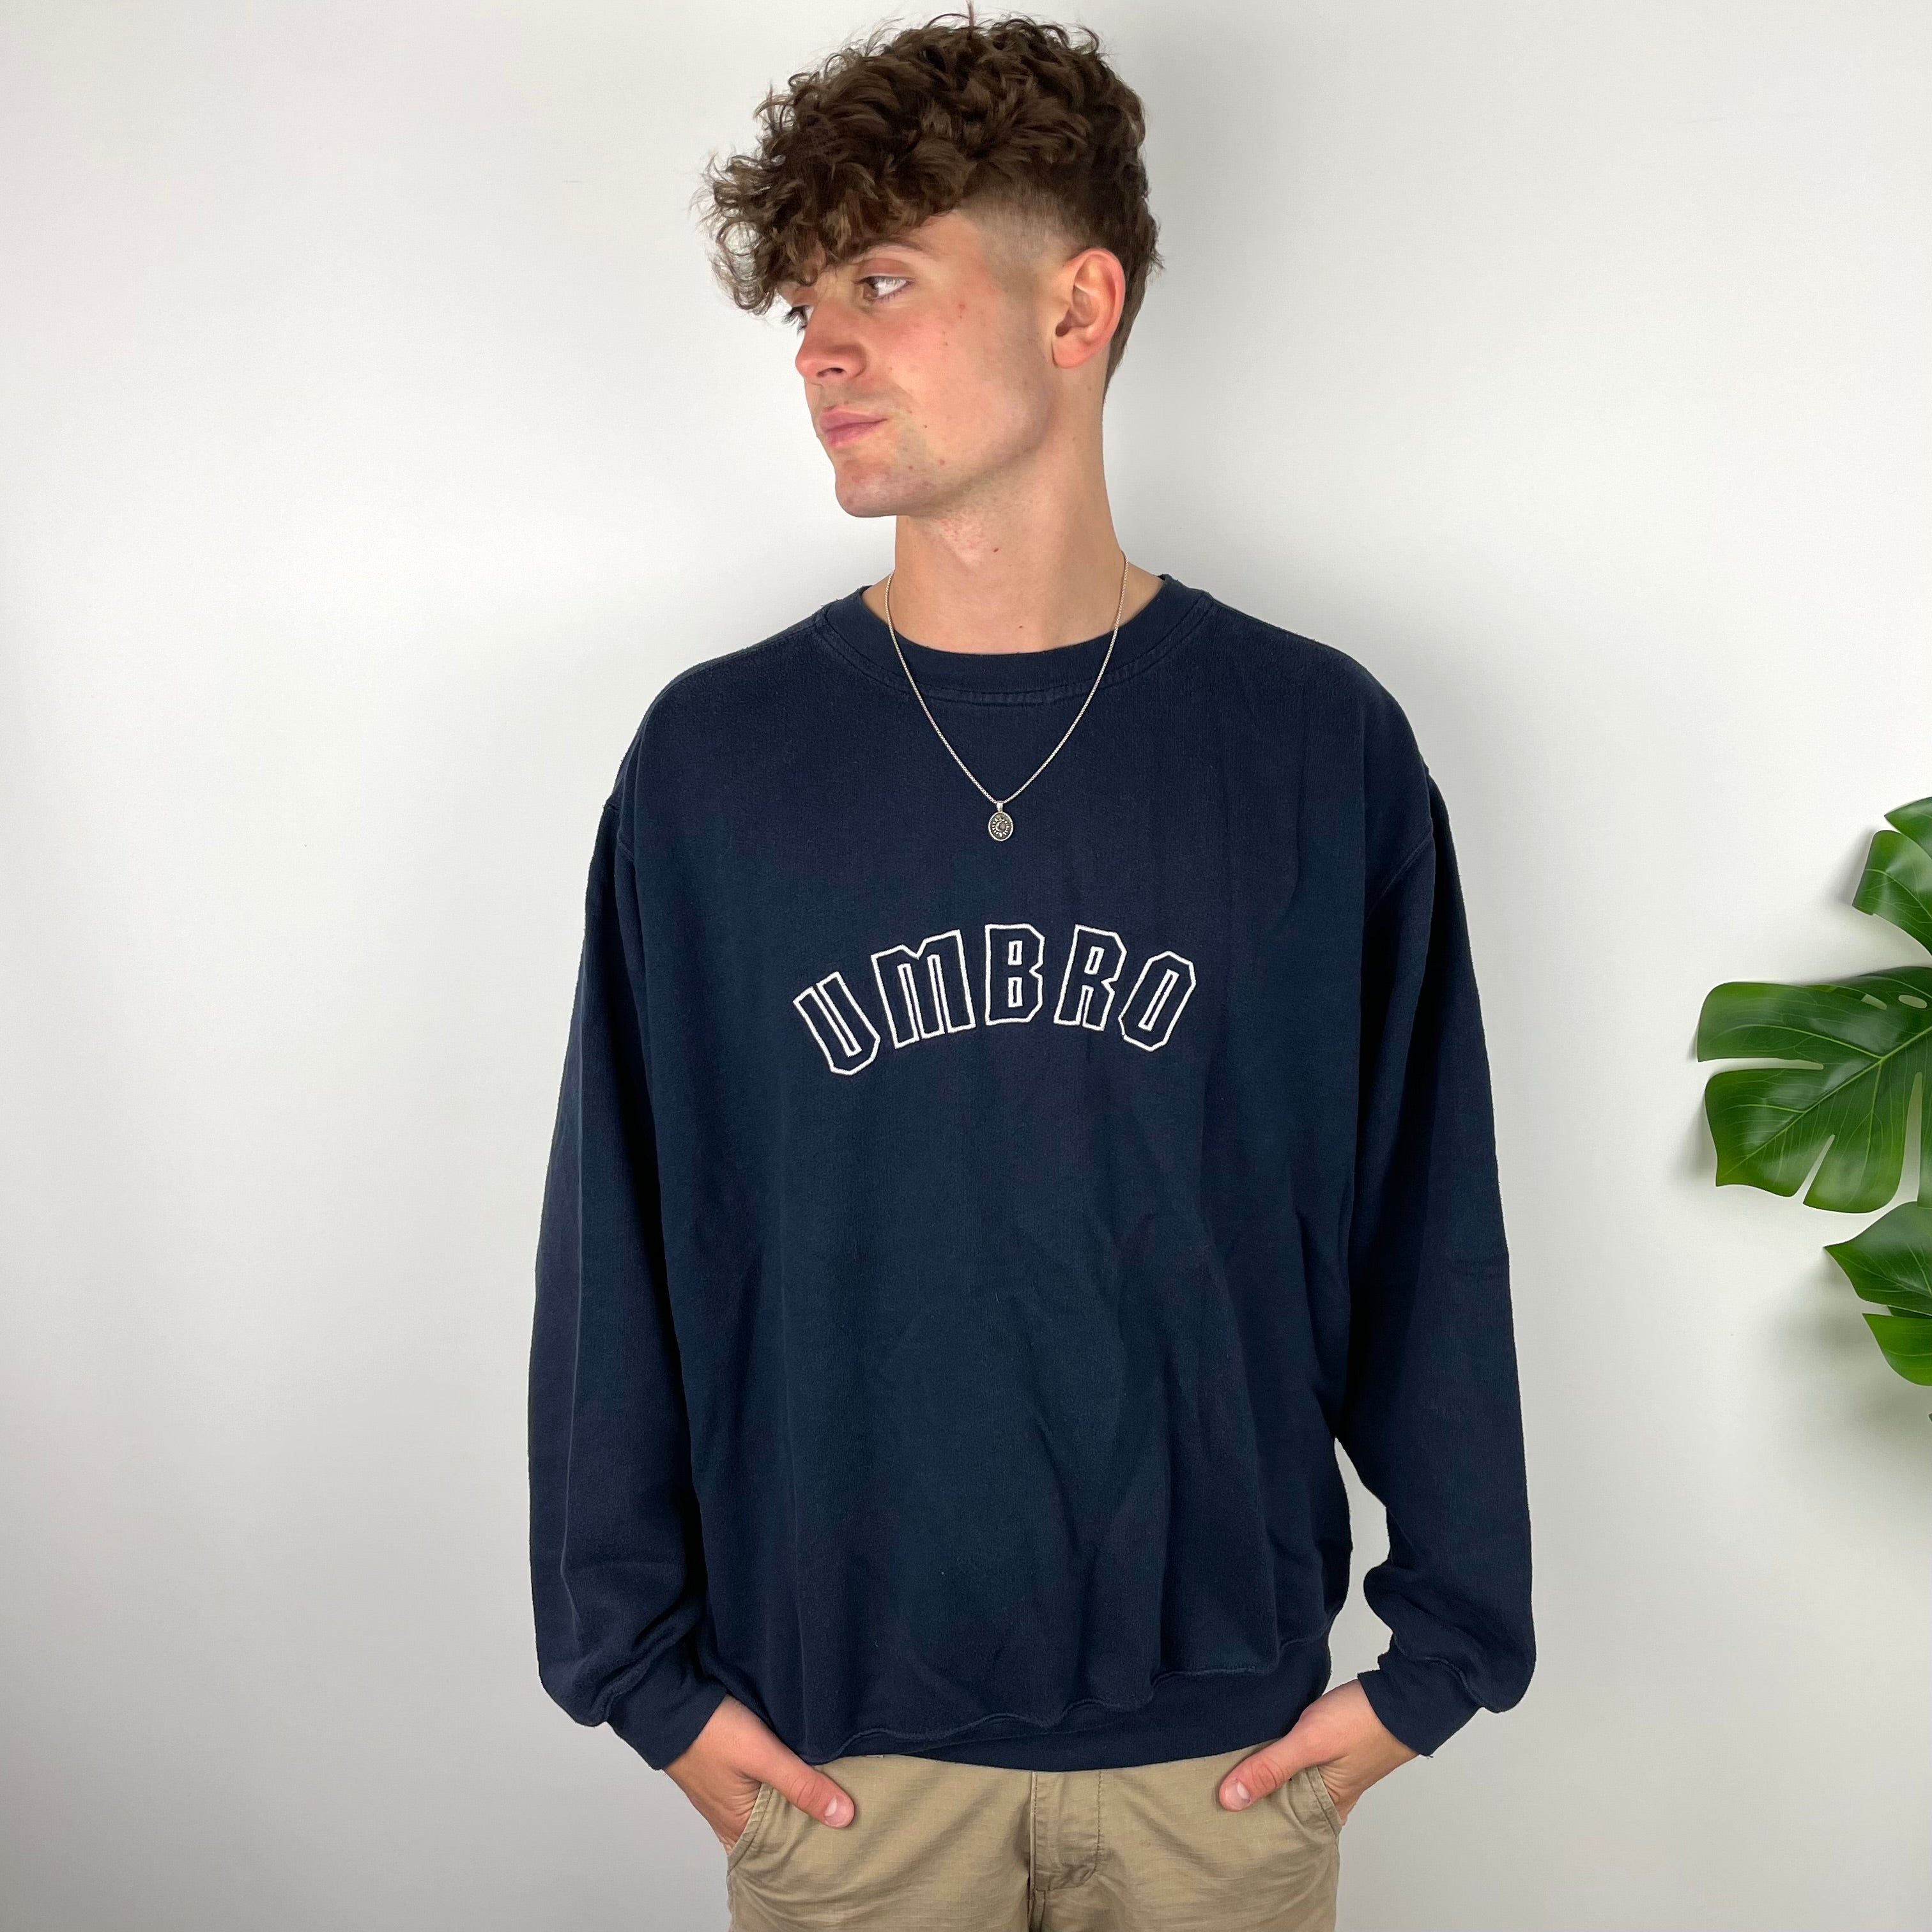 Umbro RARE Navy Embroidered Spell Out Sweatshirt (XL)